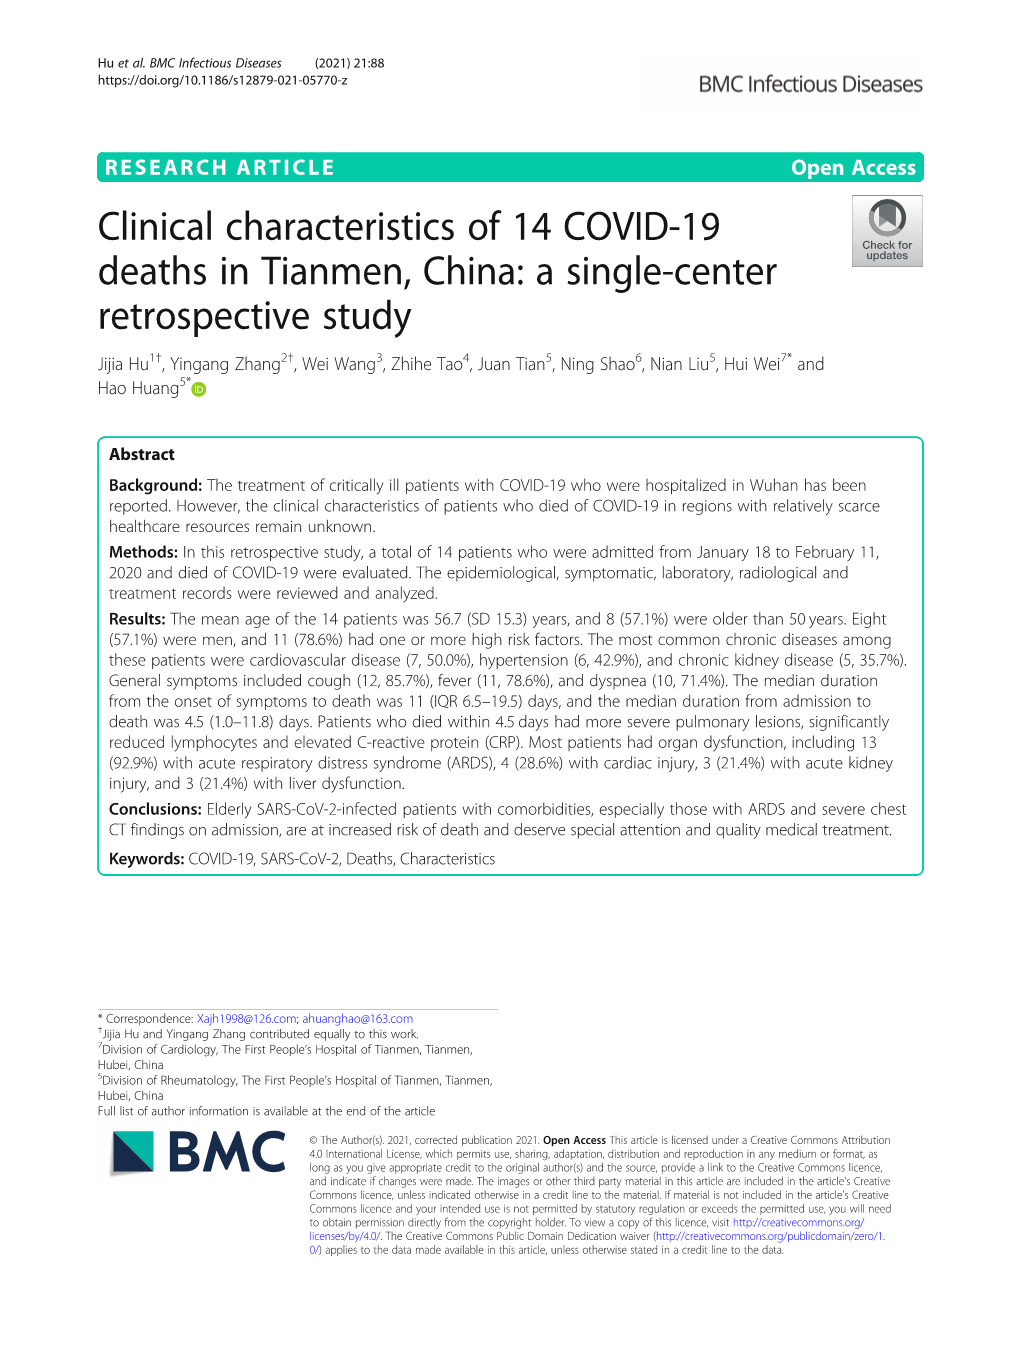 Clinical Characteristics of 14 COVID-19 Deaths in Tianmen, China